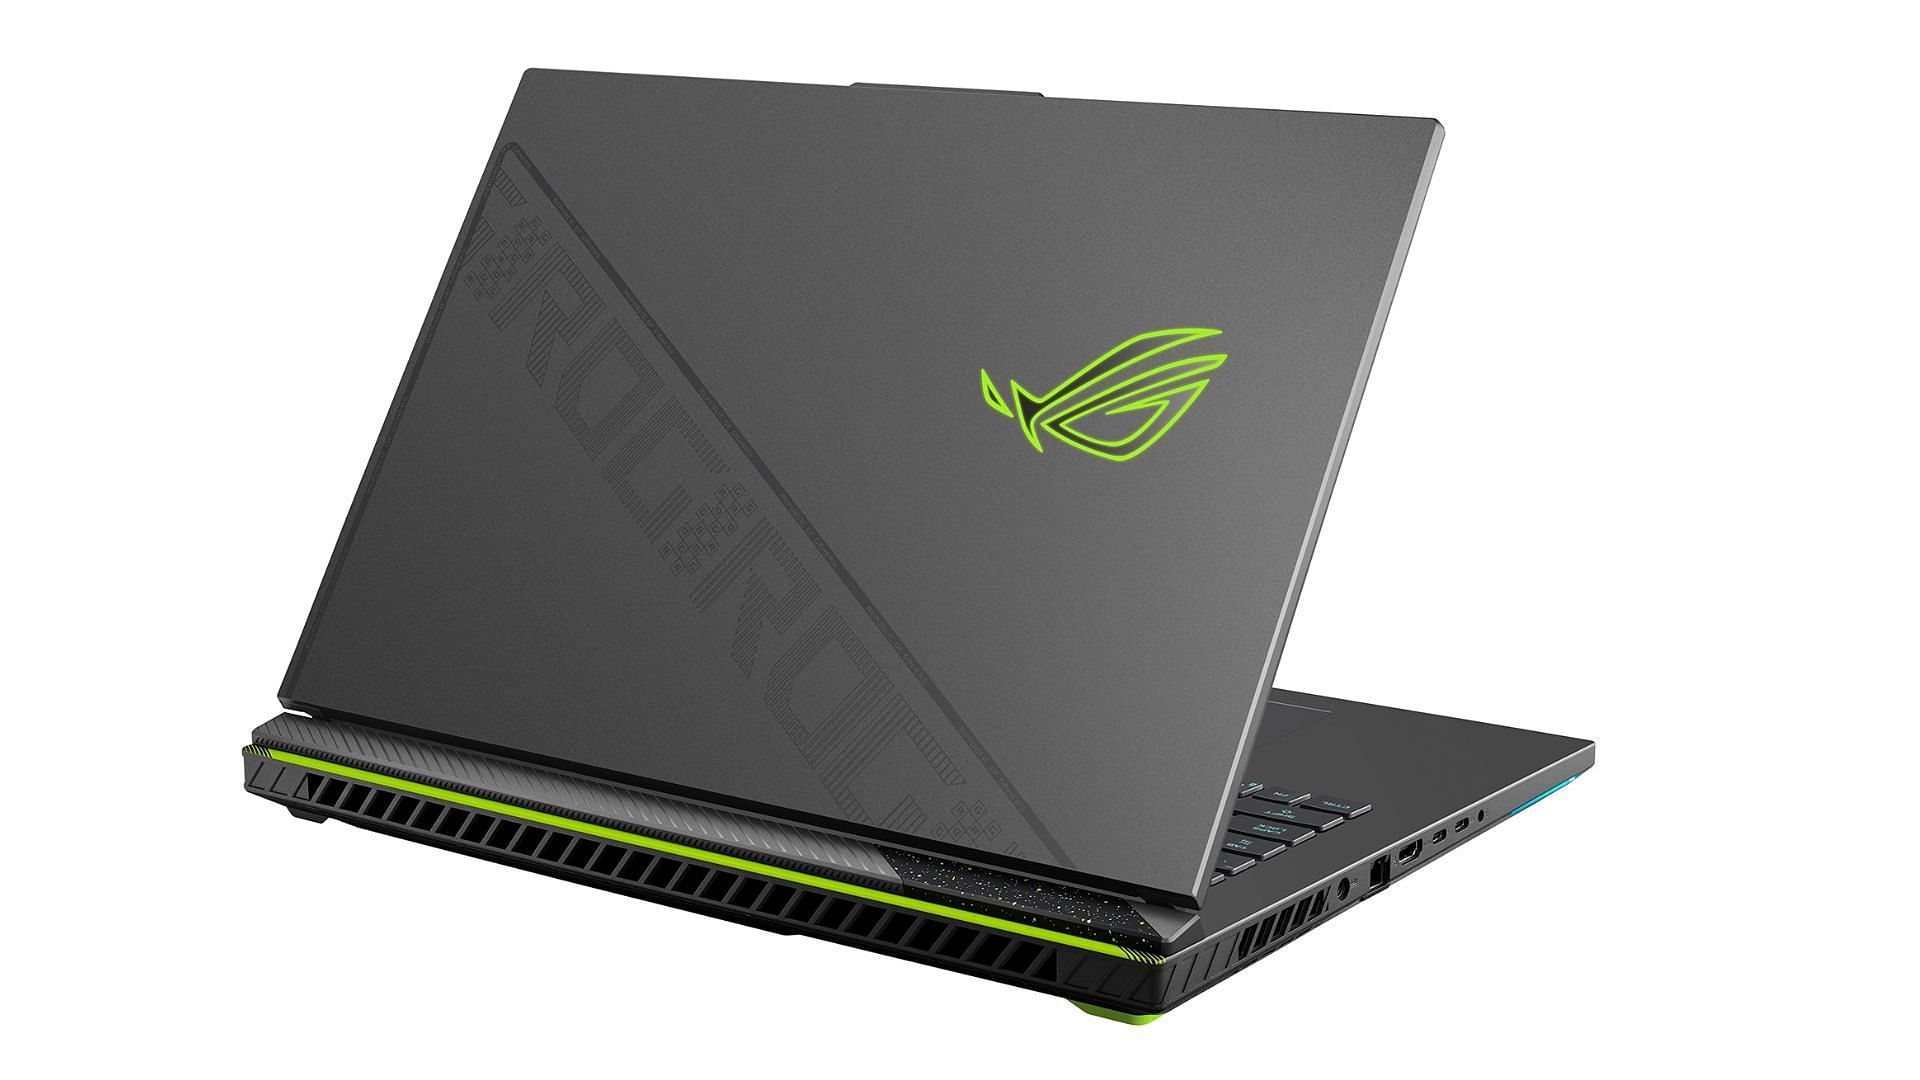 Strix series laptops are good for gaming (Image via Amazon/Asus)